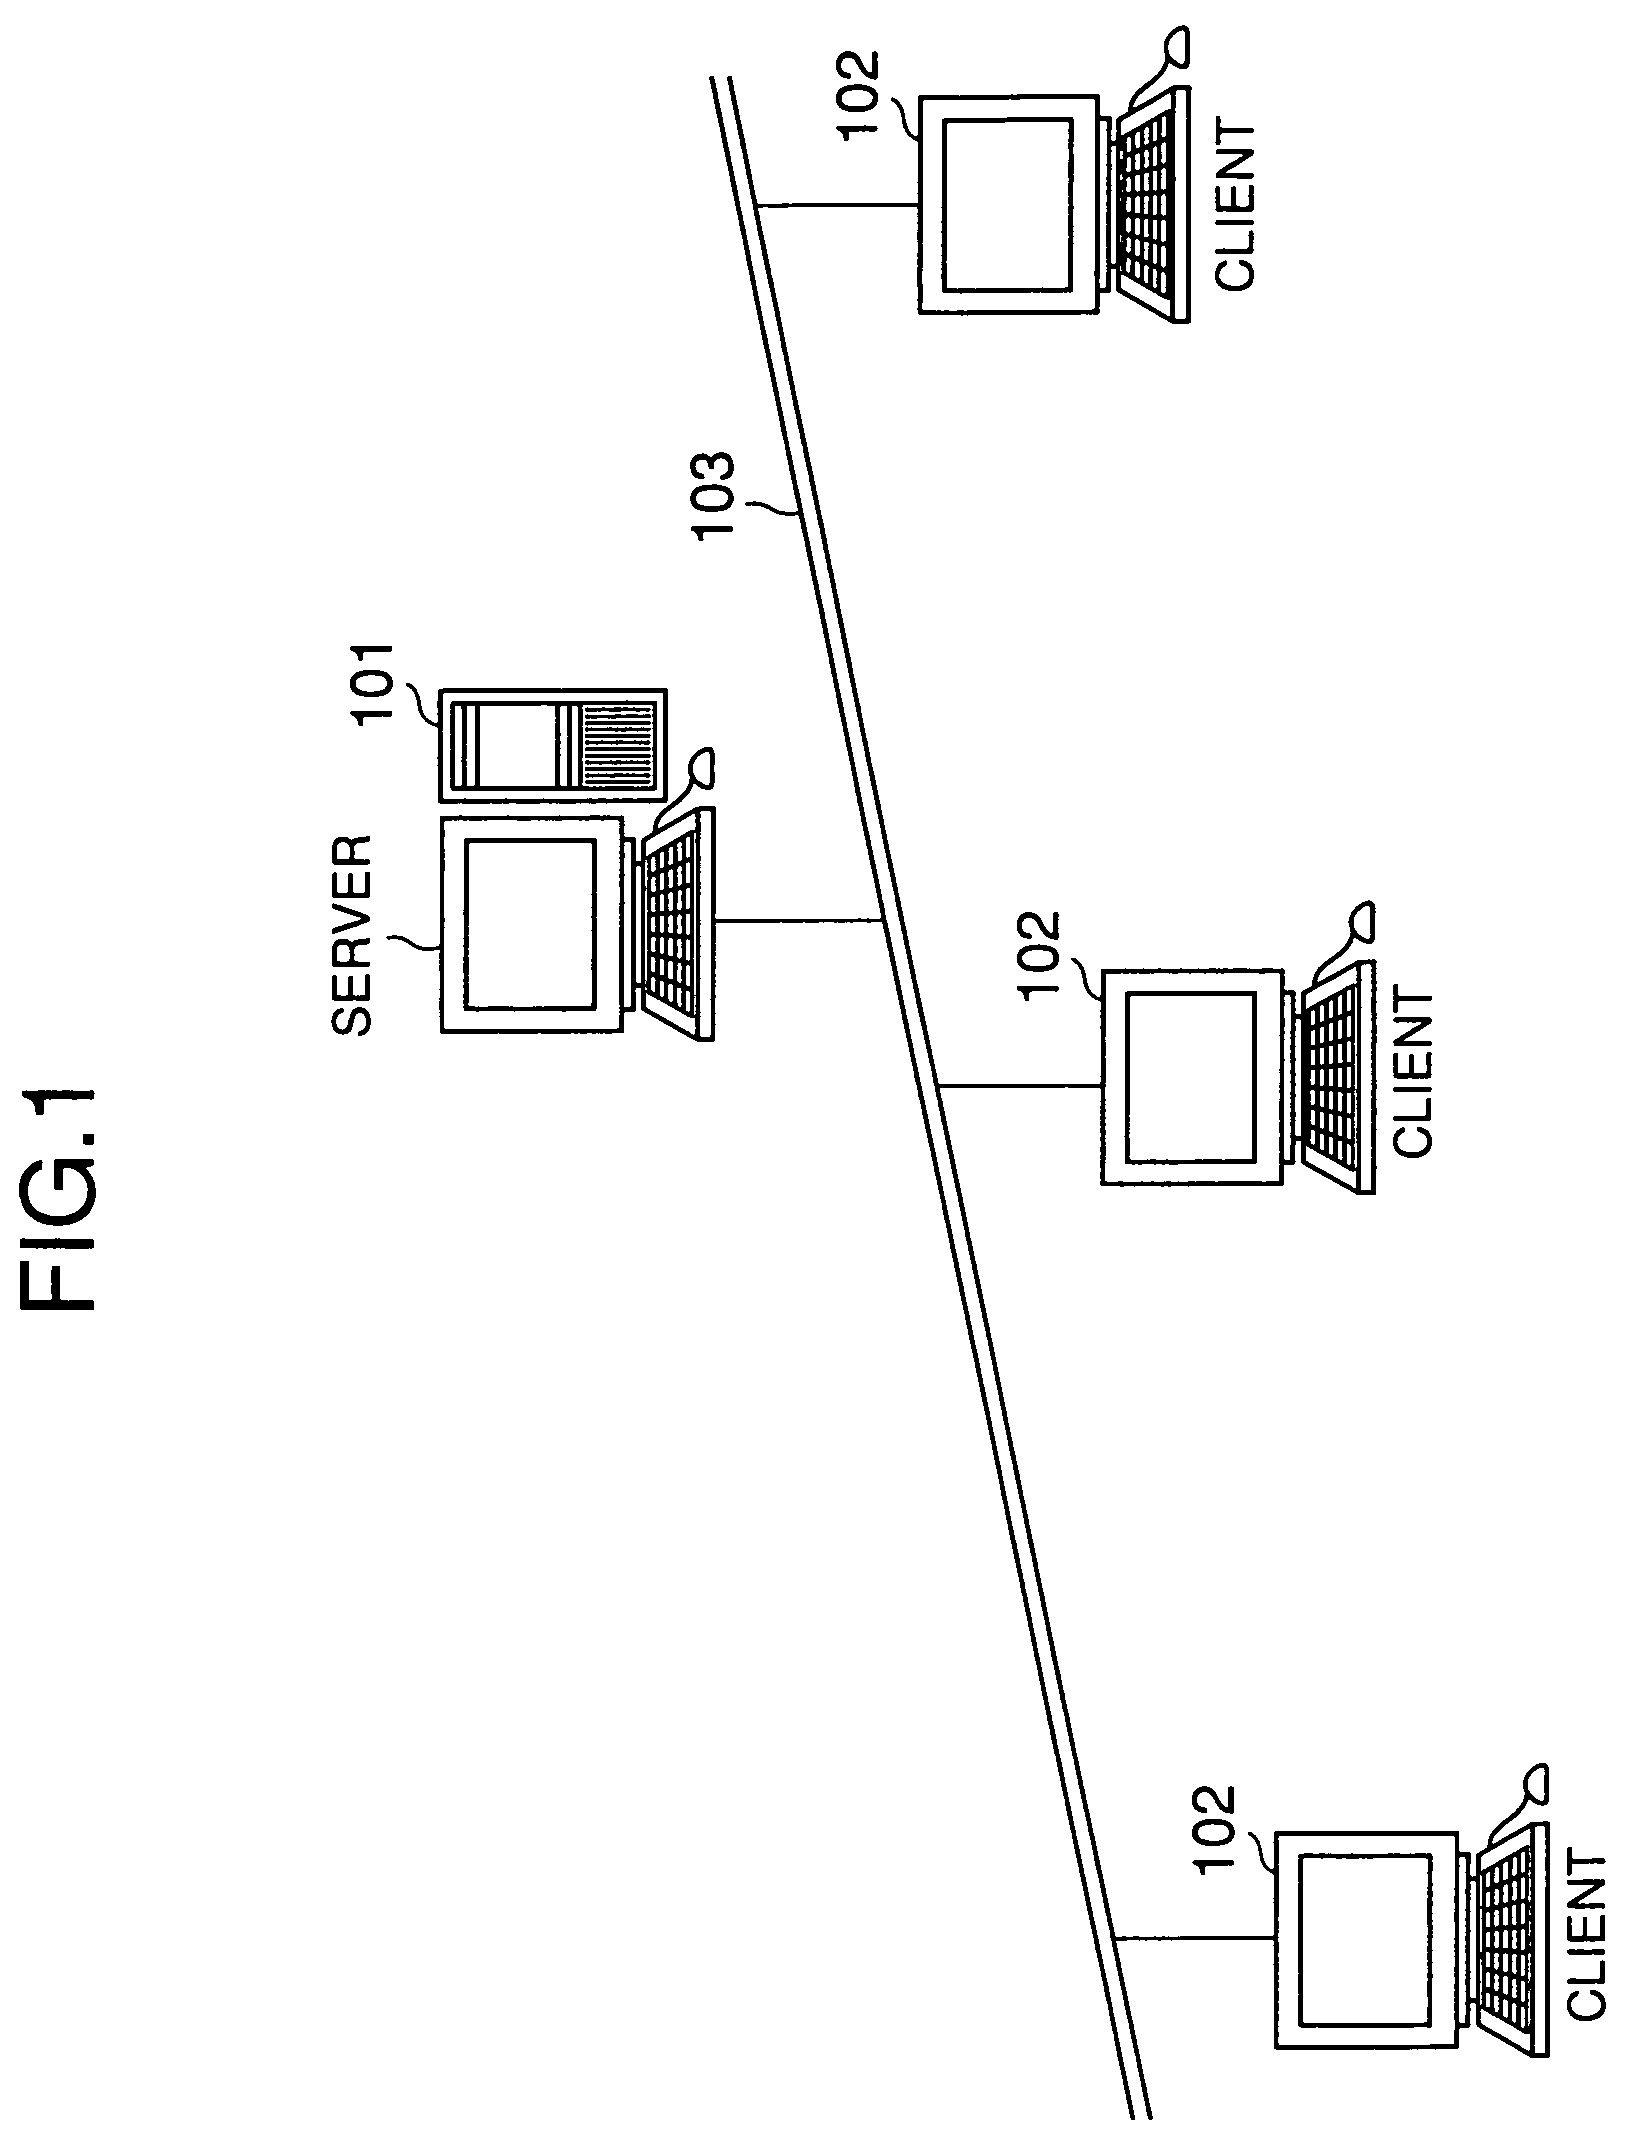 Document classification system and method for classifying a document according to contents of the document